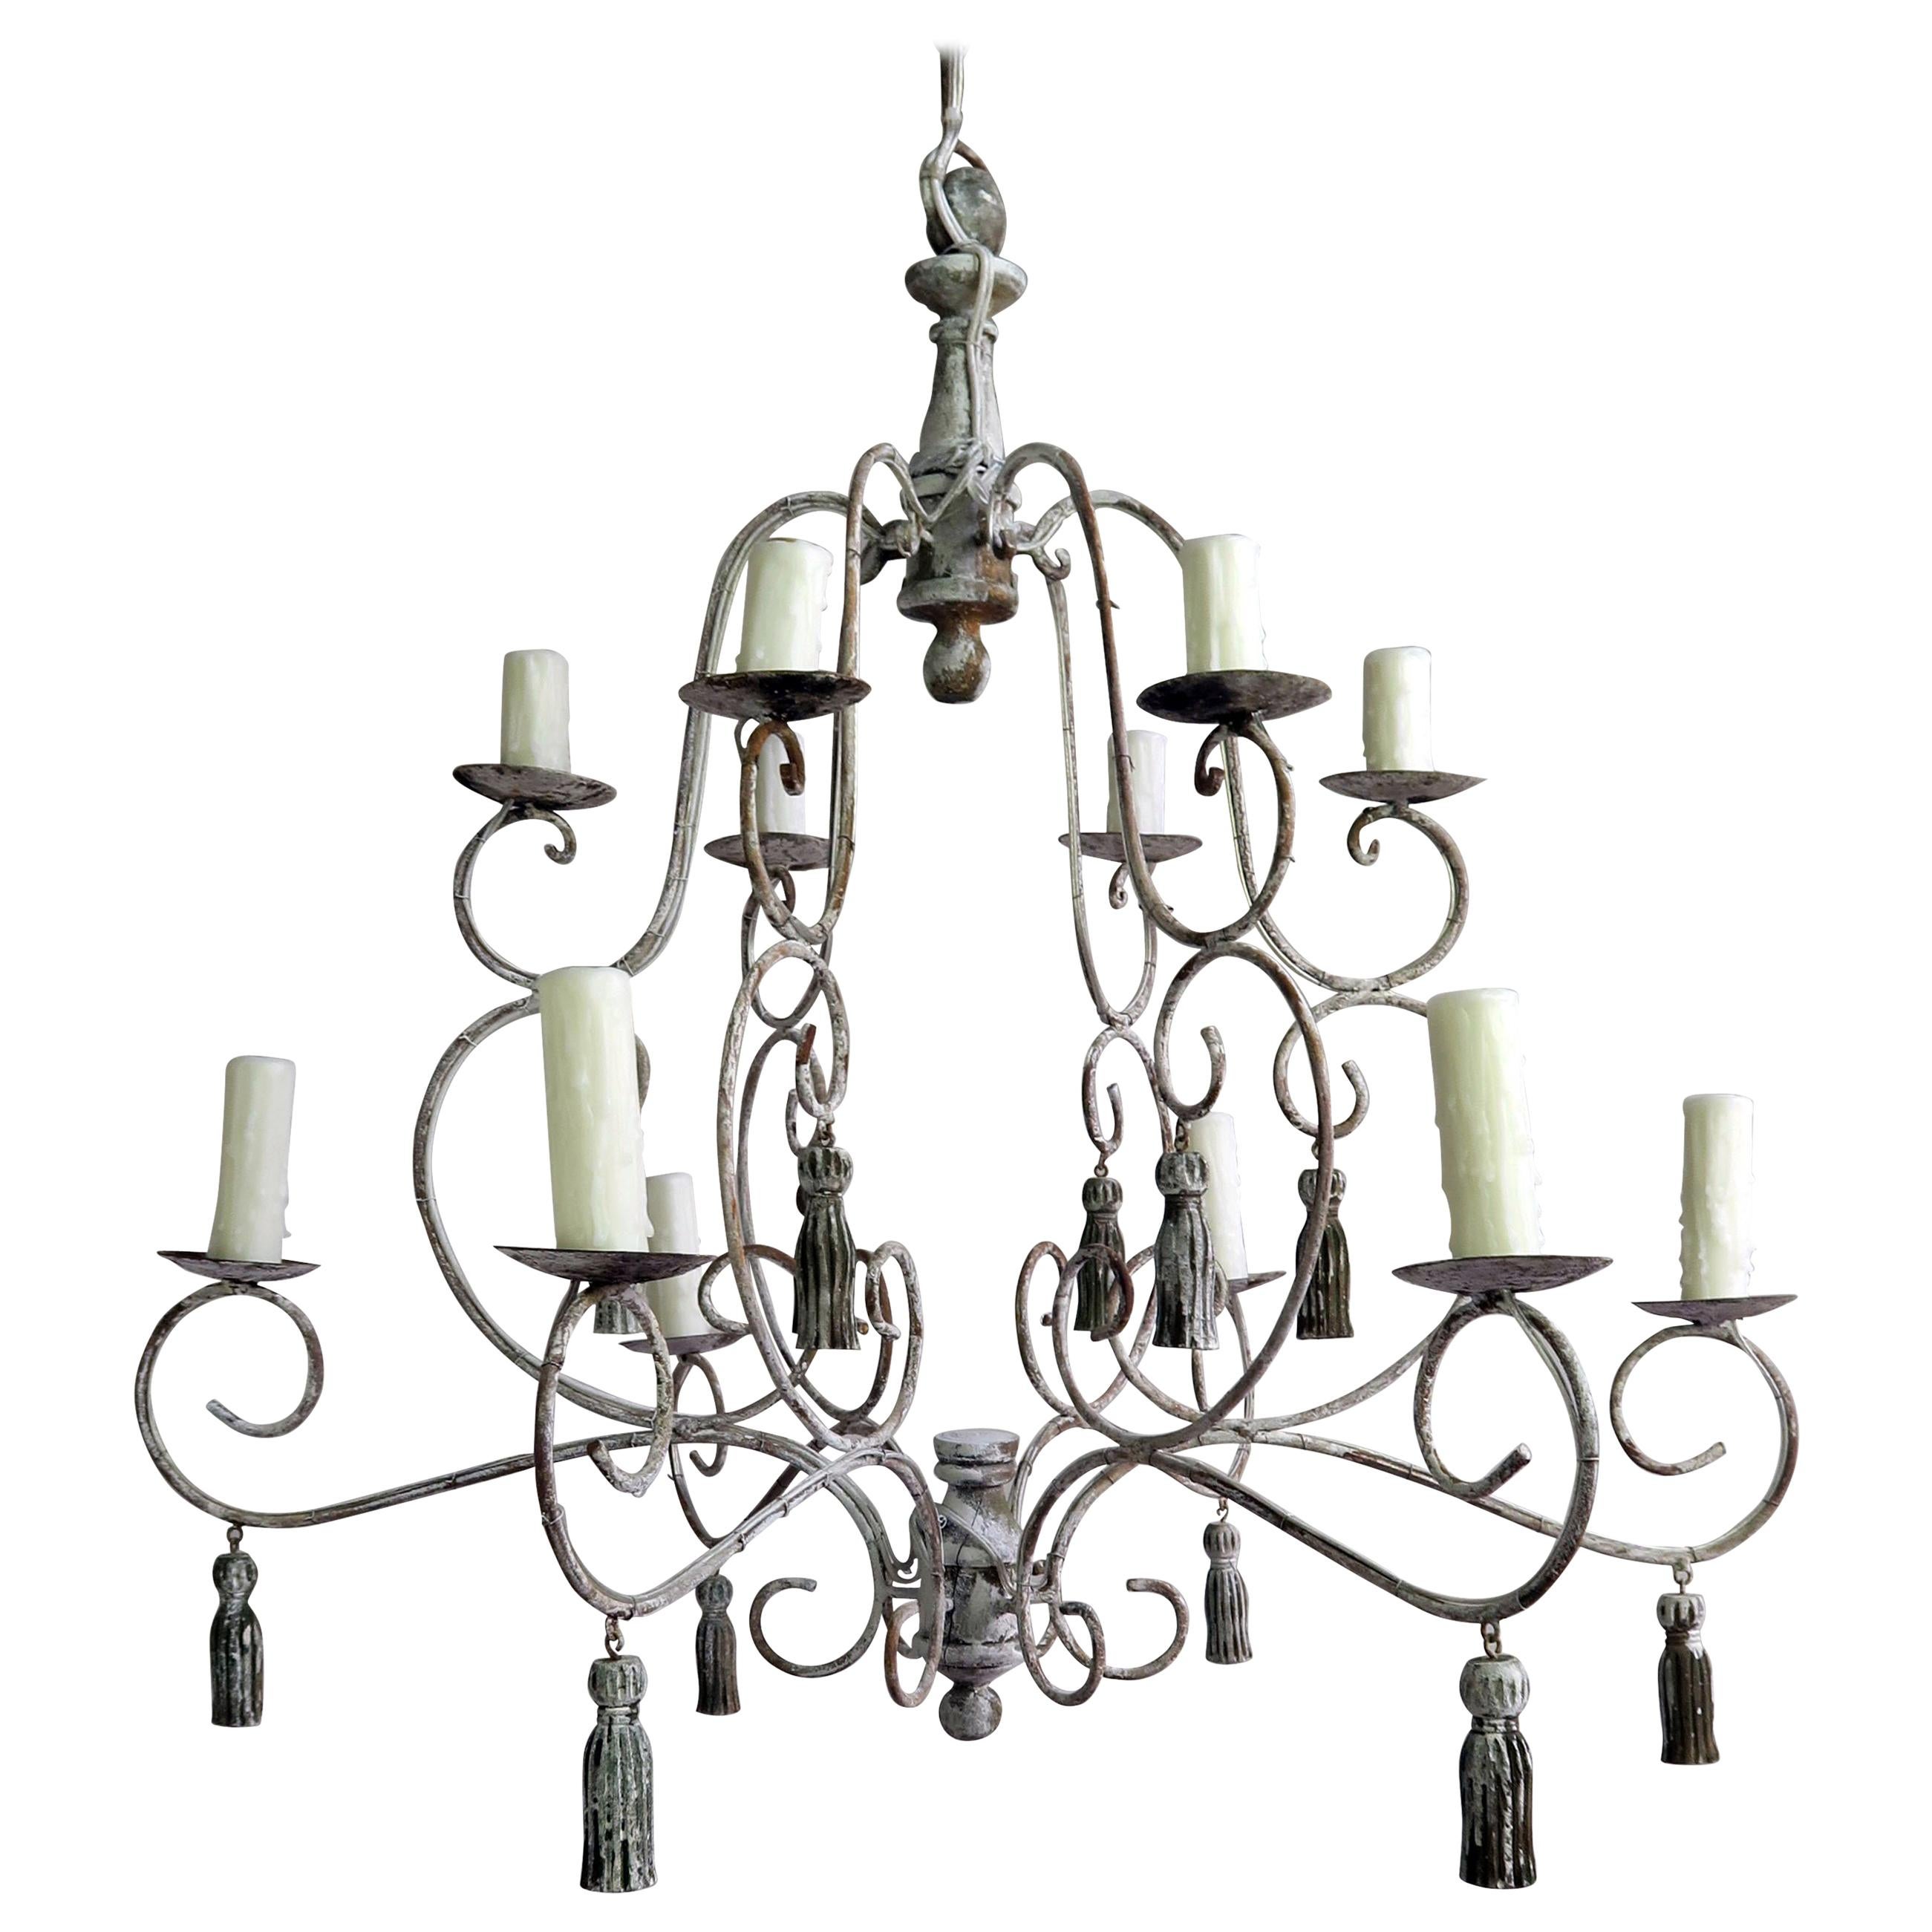 Twelve-Light French Painted Chandelier with Tassels